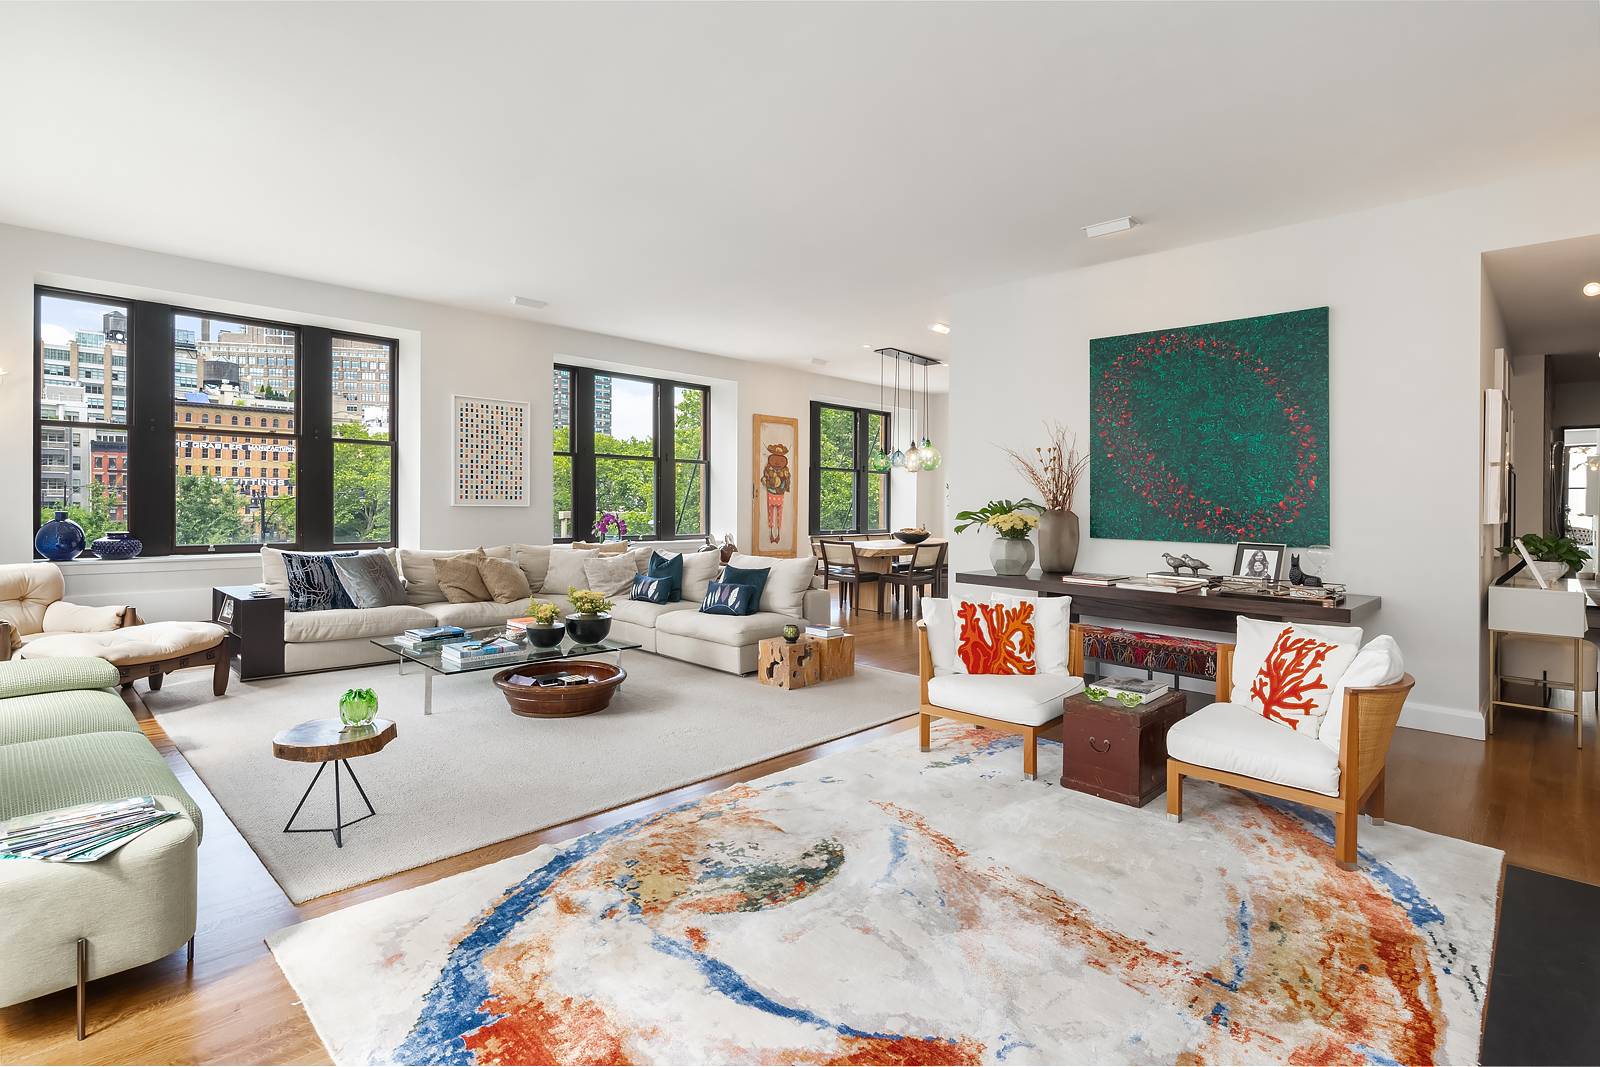 This spectacular TriBeCa loft boasts over 3, 200 square feet with four bedrooms and three and a half bathrooms.